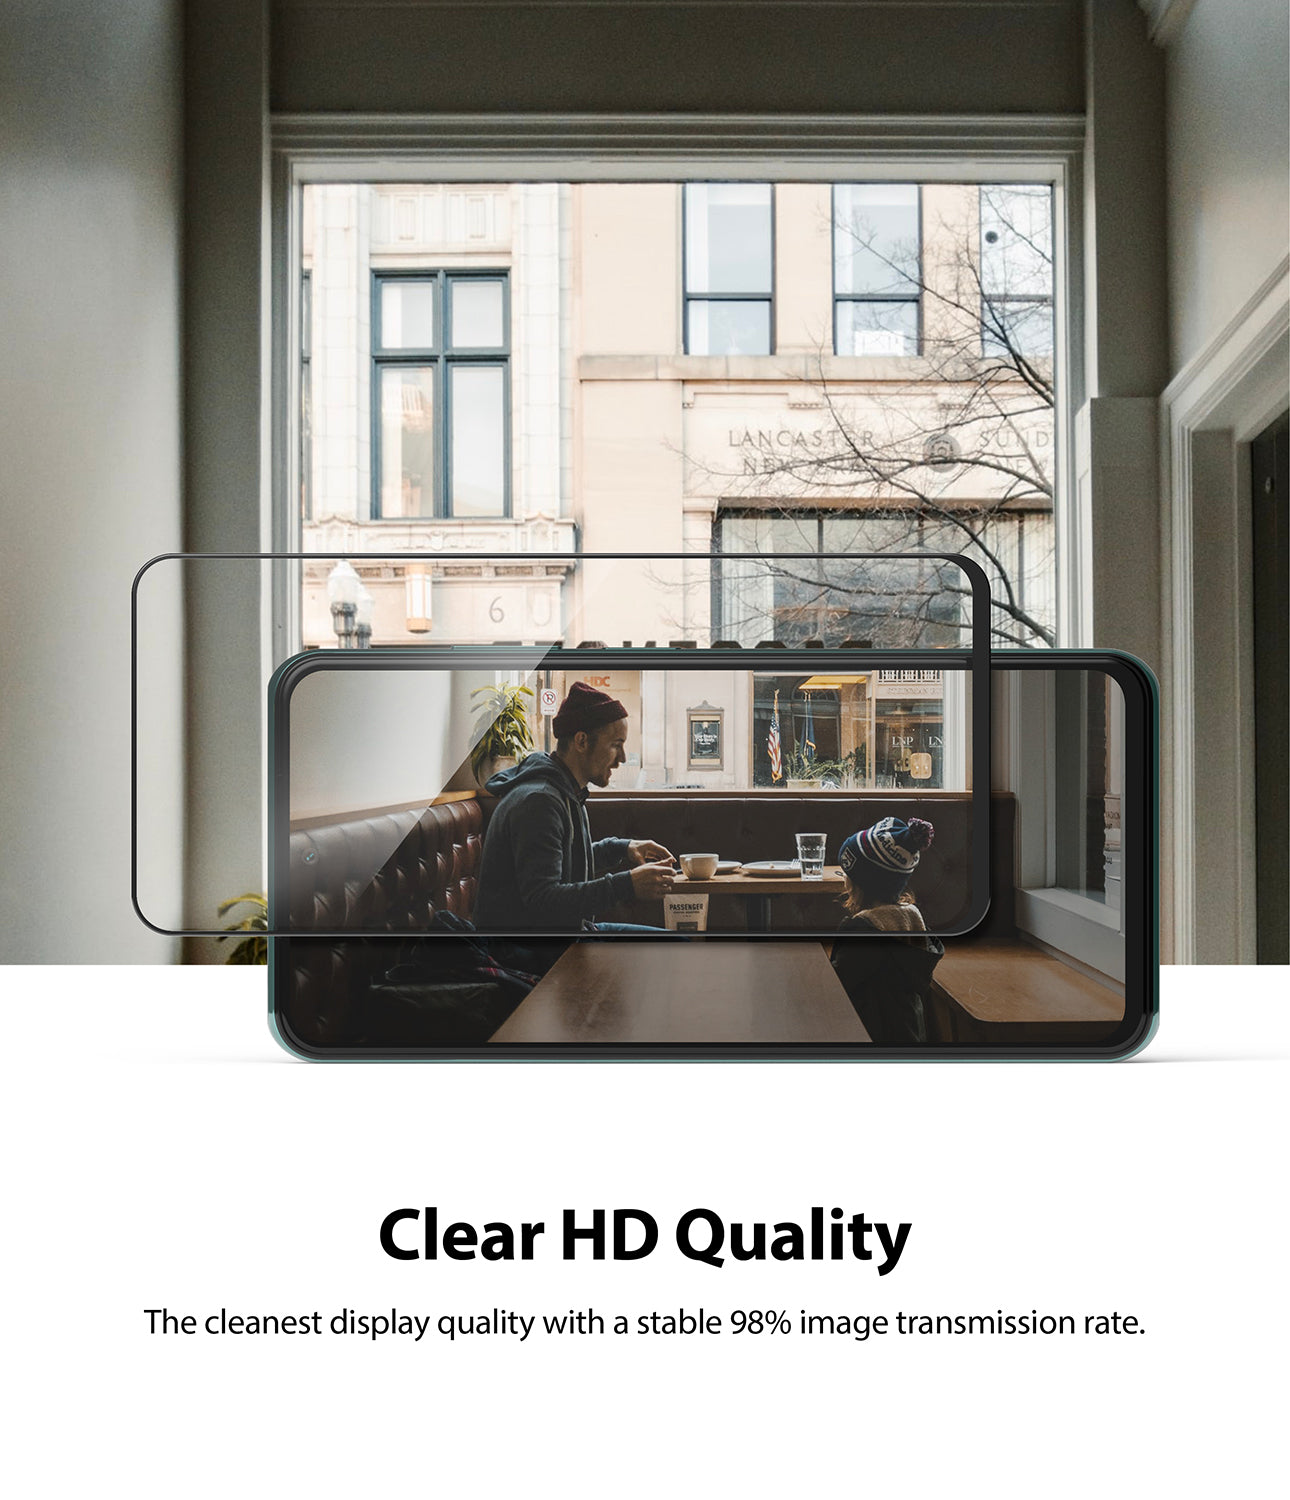 clear hd quality - the cleanest display quality with a stable 98% image transmission rate